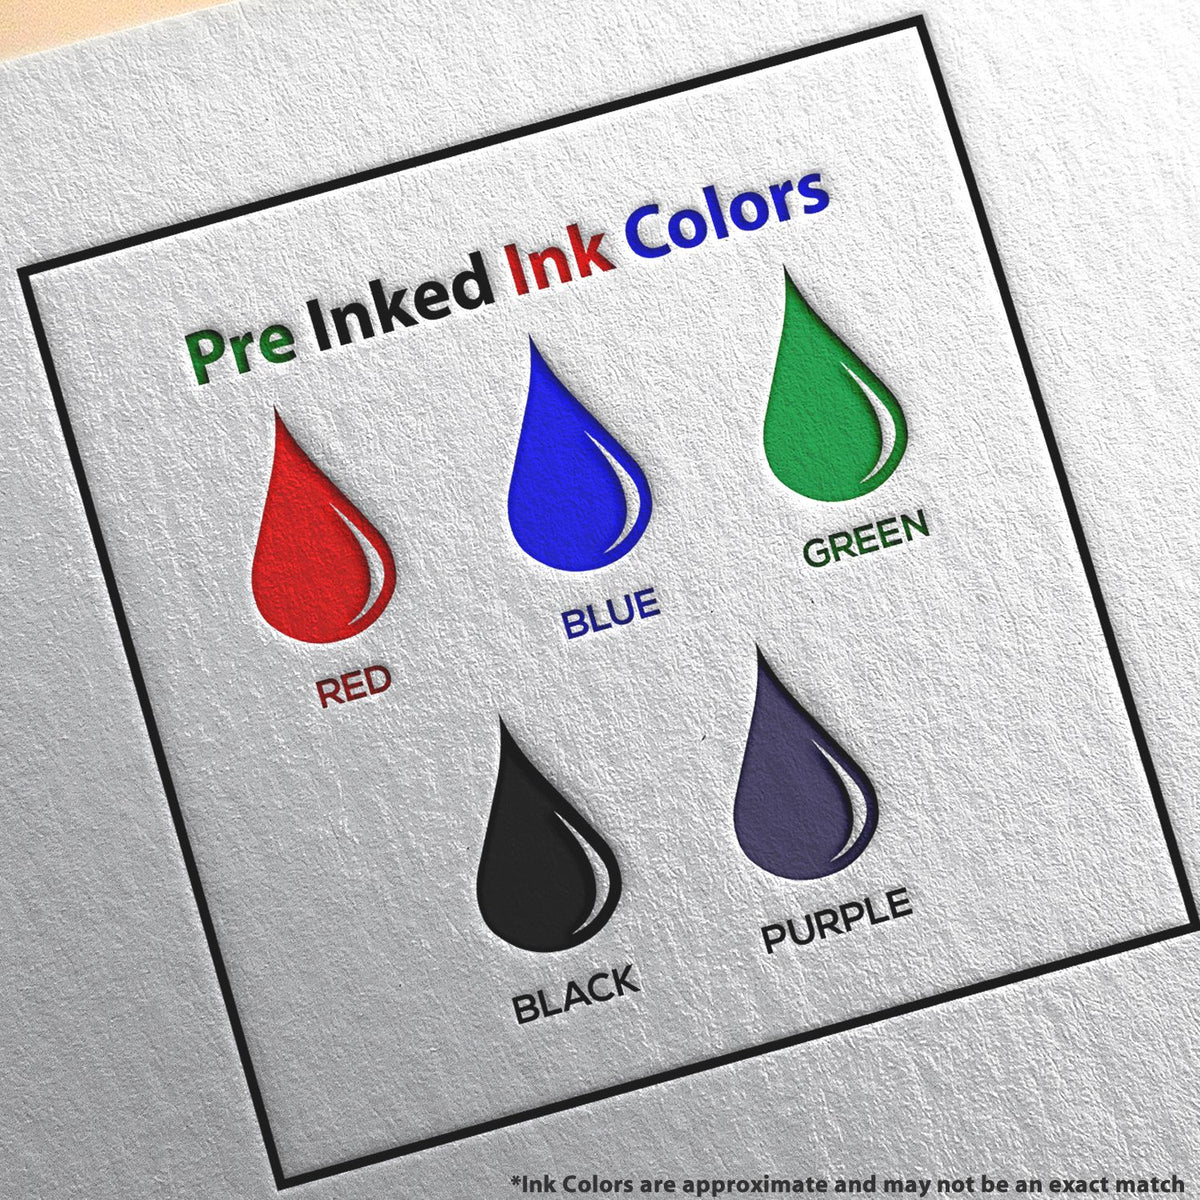 A picture showing the different ink colors or hues available for the Super Slim Arizona Notary Public Stamp product.